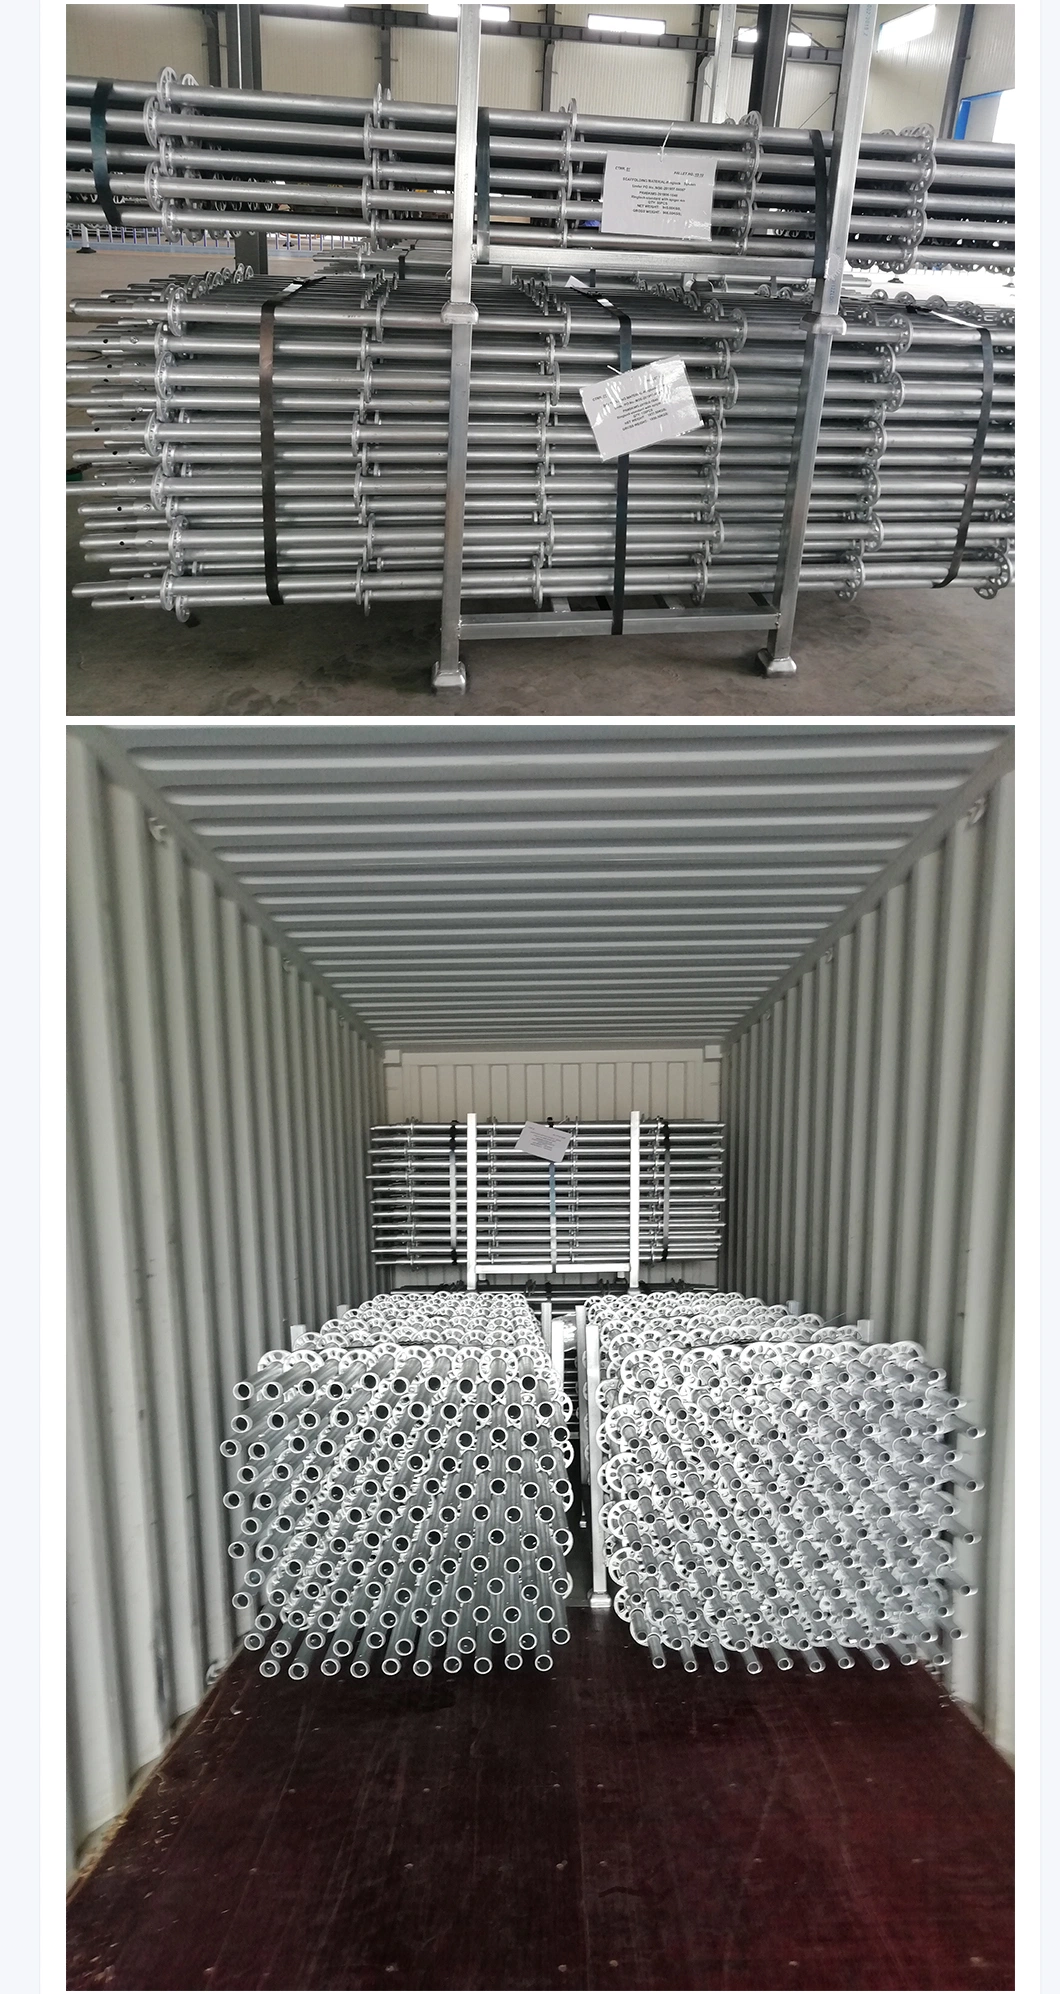 Layher Allround European Standard Metal Material Ringlock Scaffold and Steel Mobile Scaffold Form/Tower for Inside Installation Decoration